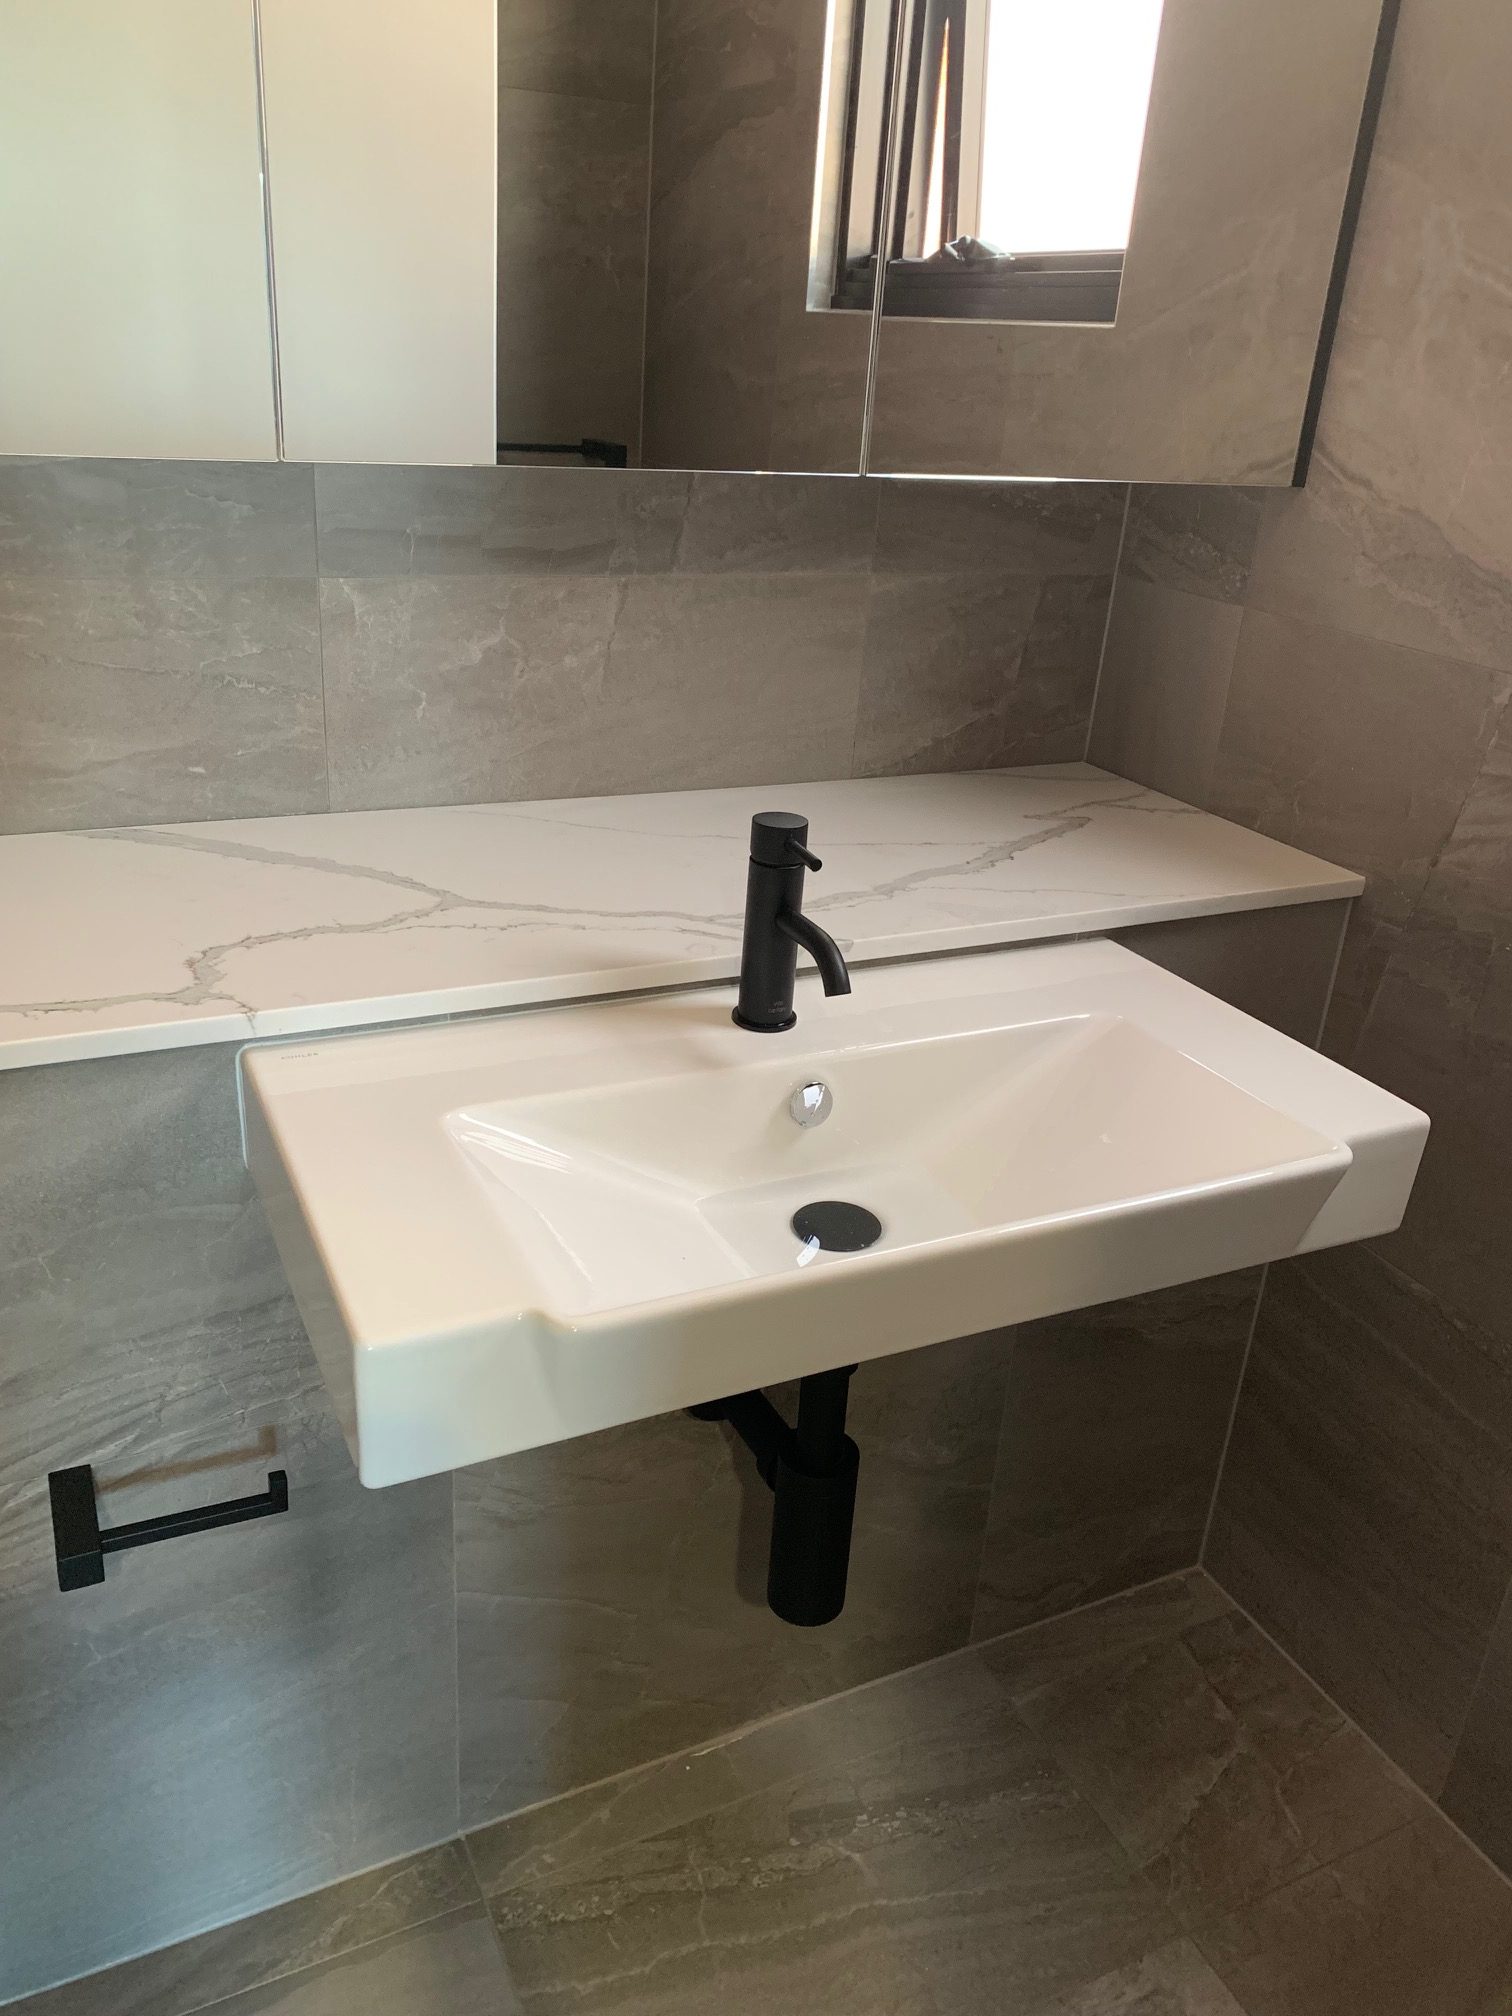 Bathroom benchtop with Warmtech Inscreed heating system